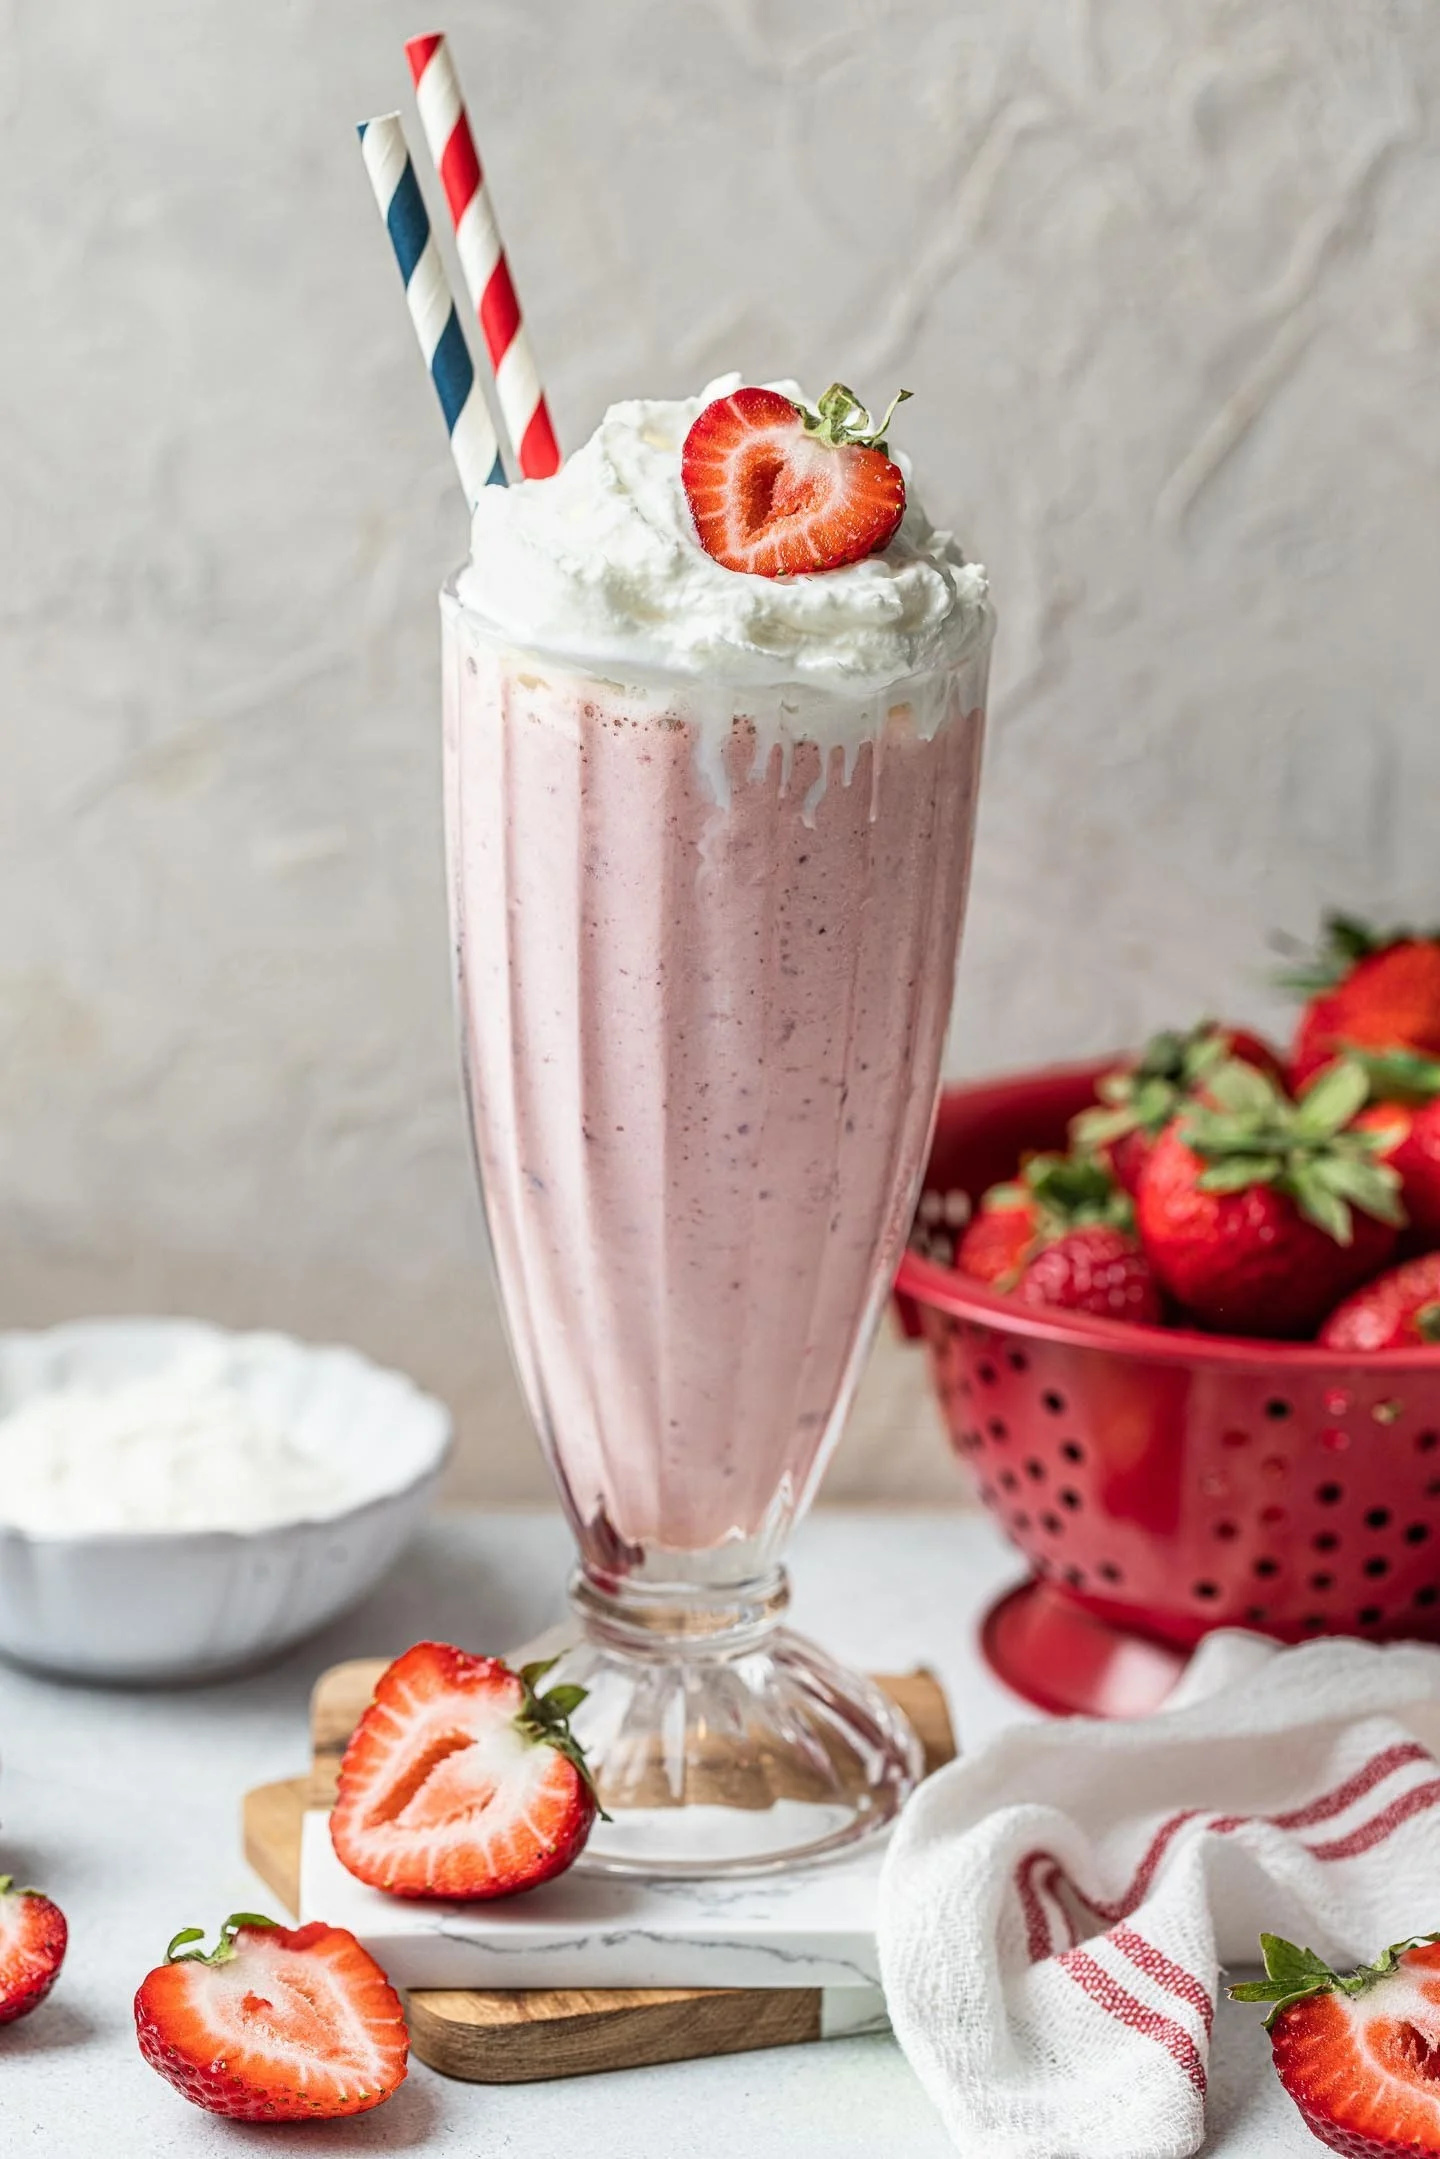 Milkshake: A sweet, cold drink made with ice cream. 1440x2160 HD Wallpaper.